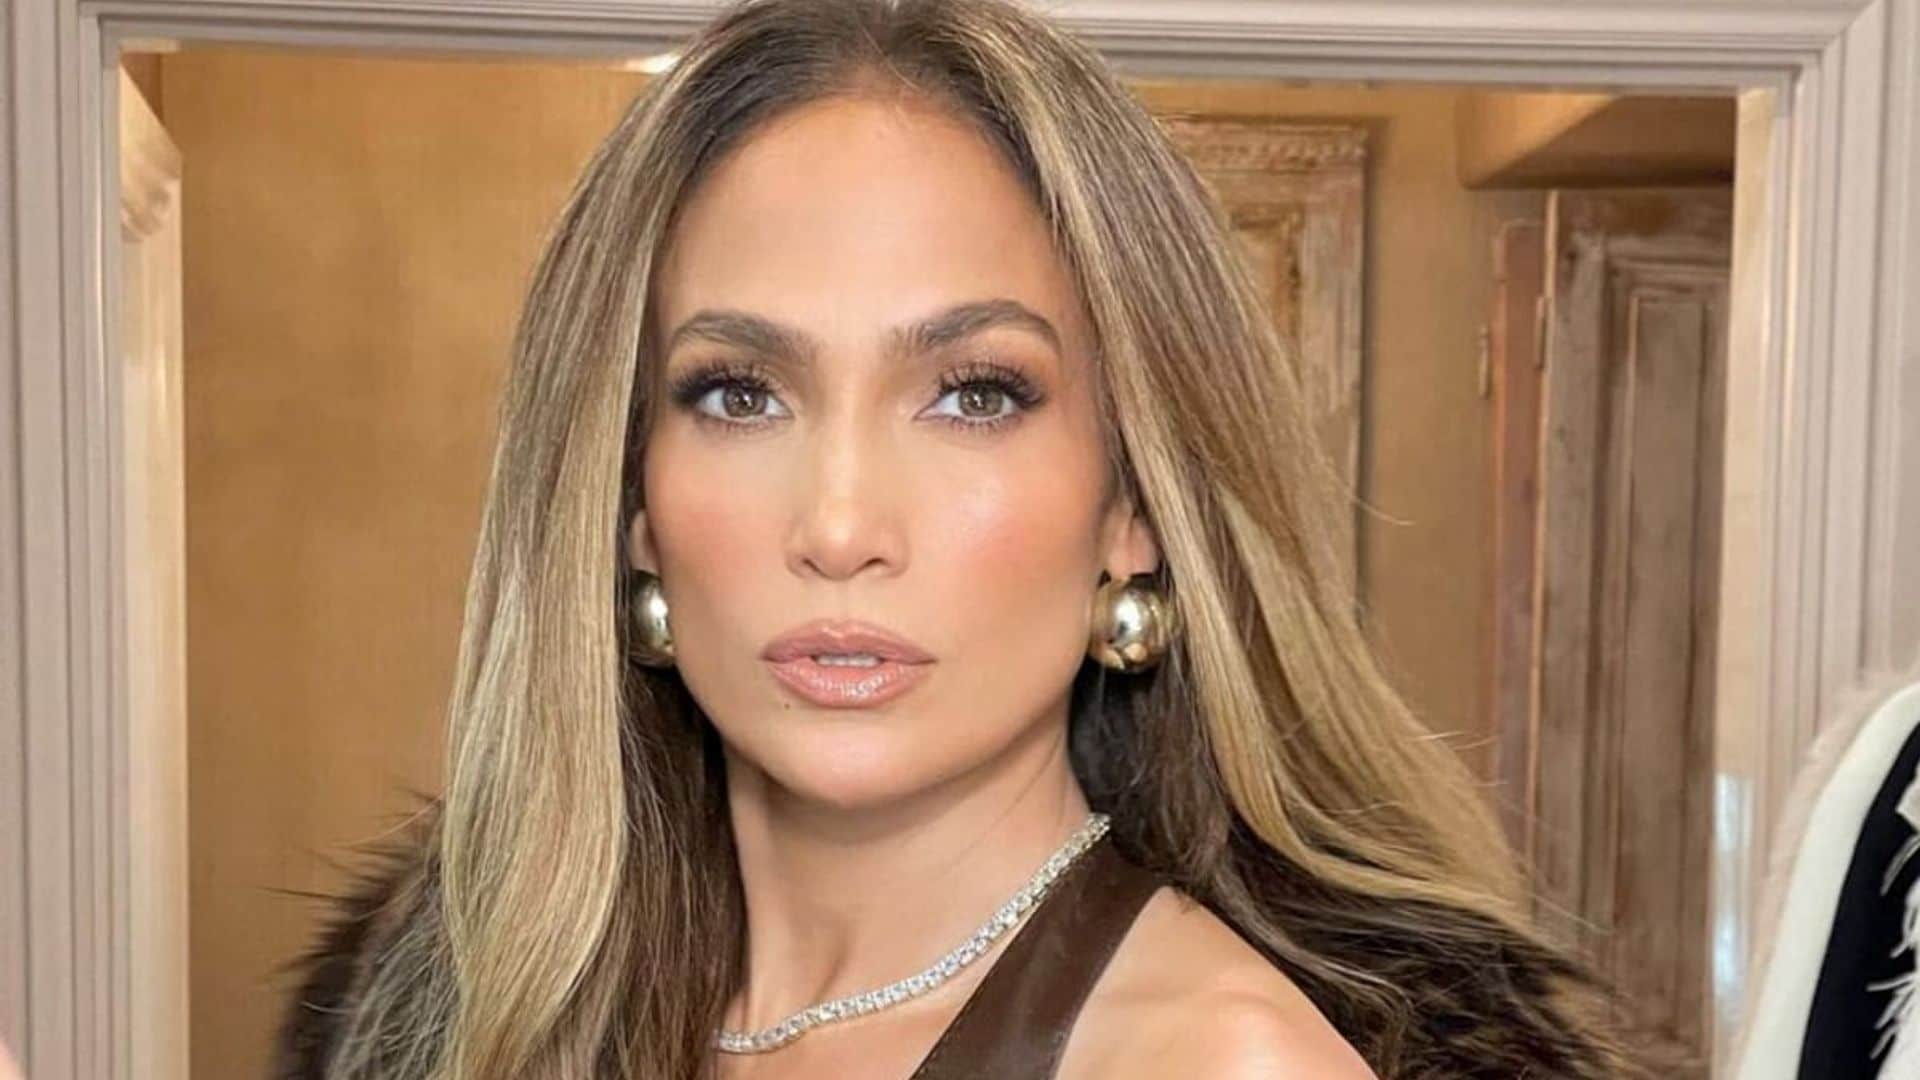 Jennifer Lopez shows off incredible figure in green sequin dress and gold jewelry